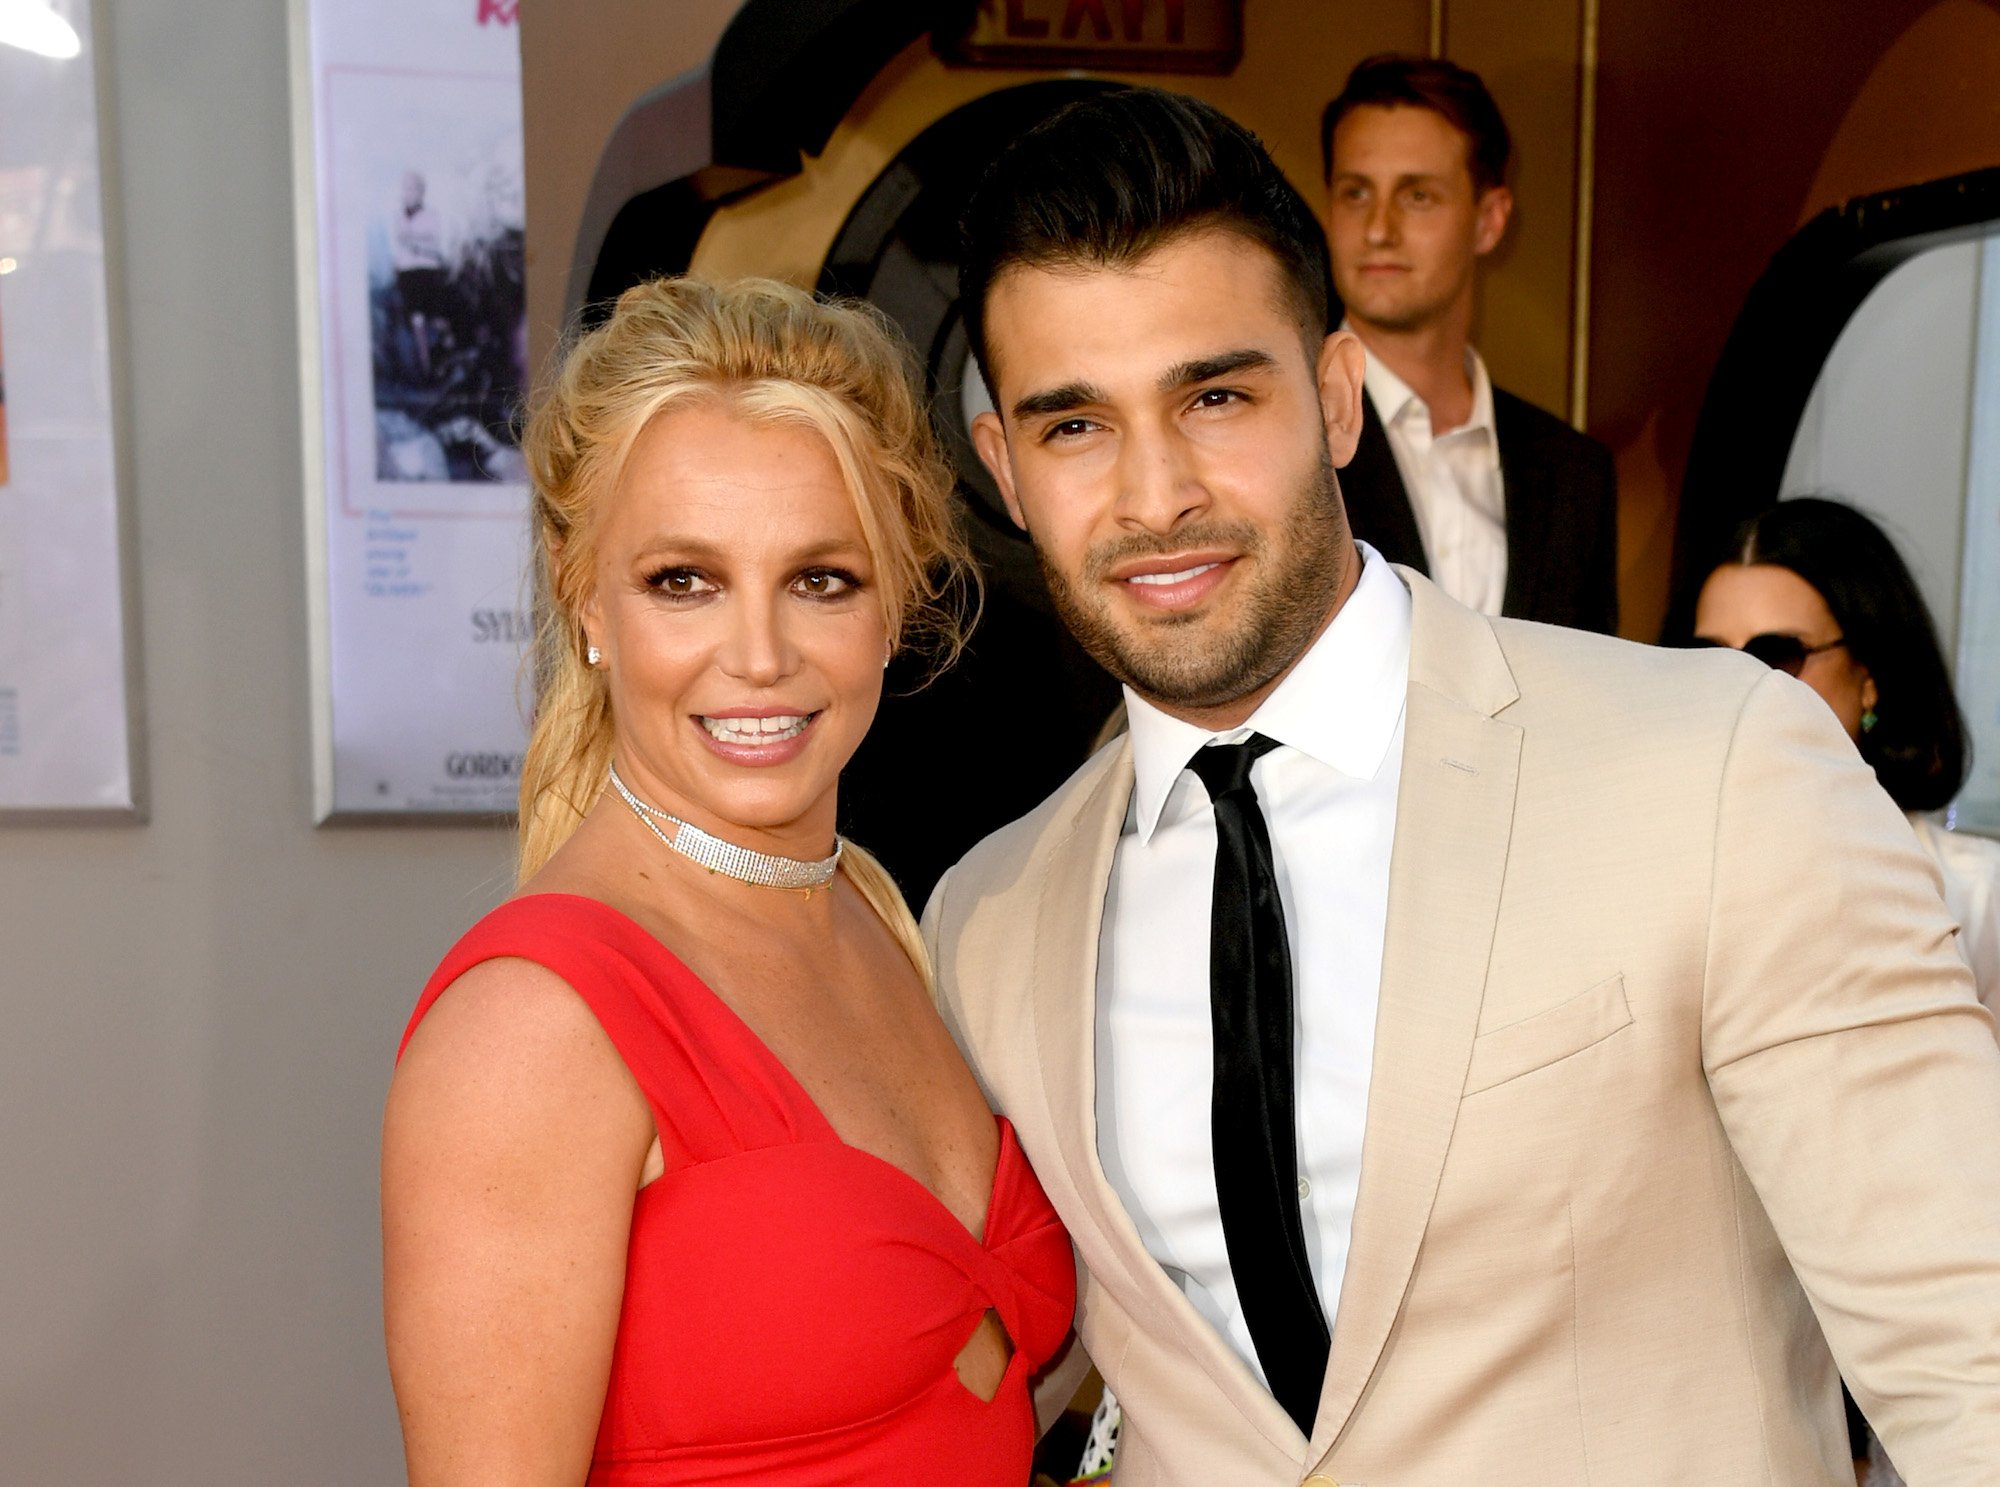 Britney Spears and Sam Asghari attendinghte premiere of "Once Upon A Time...In Hollywood"